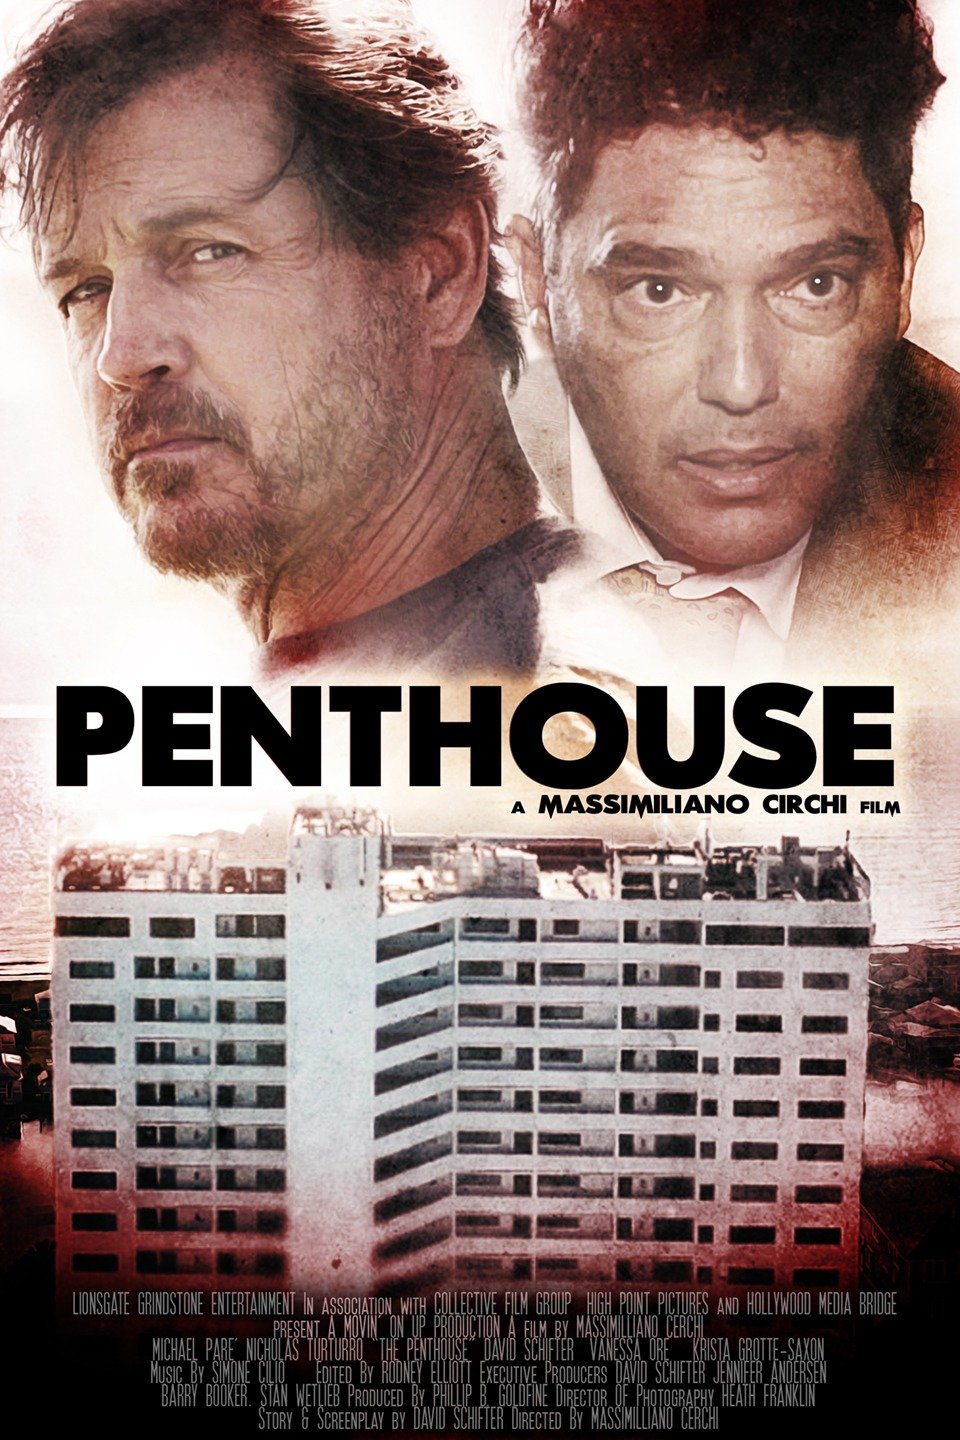 The Penthouse (2010 Film)